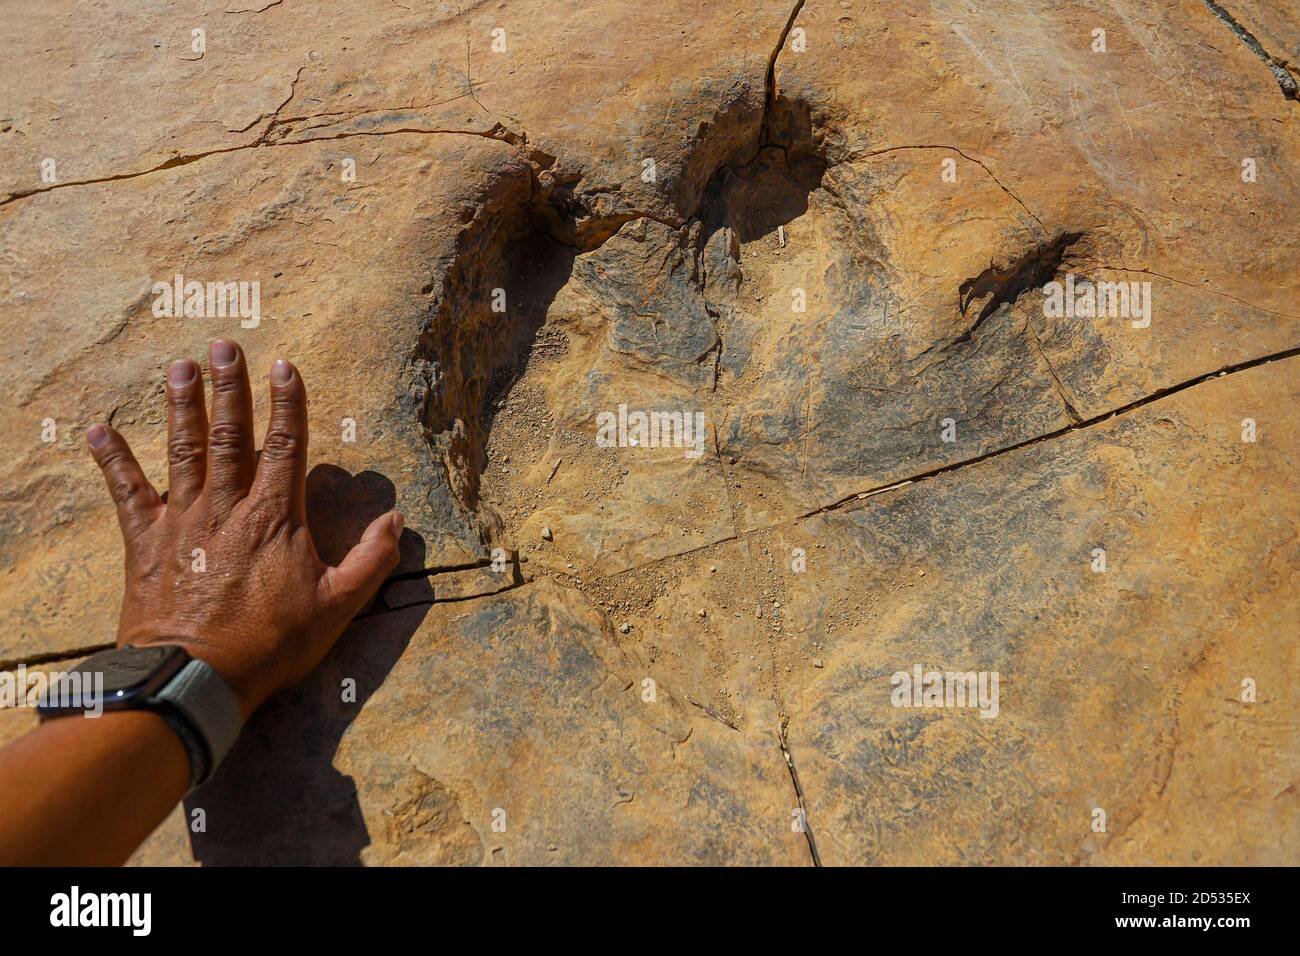 Footprint of a hadrosaur 'duckbill', a fossilized dinosaur on flagstone in  a canyon in Esqueda, Sonora, Mexico. This area is now a Sonora Dinosaur  Park, where the dinosaur footprint route is promoted.